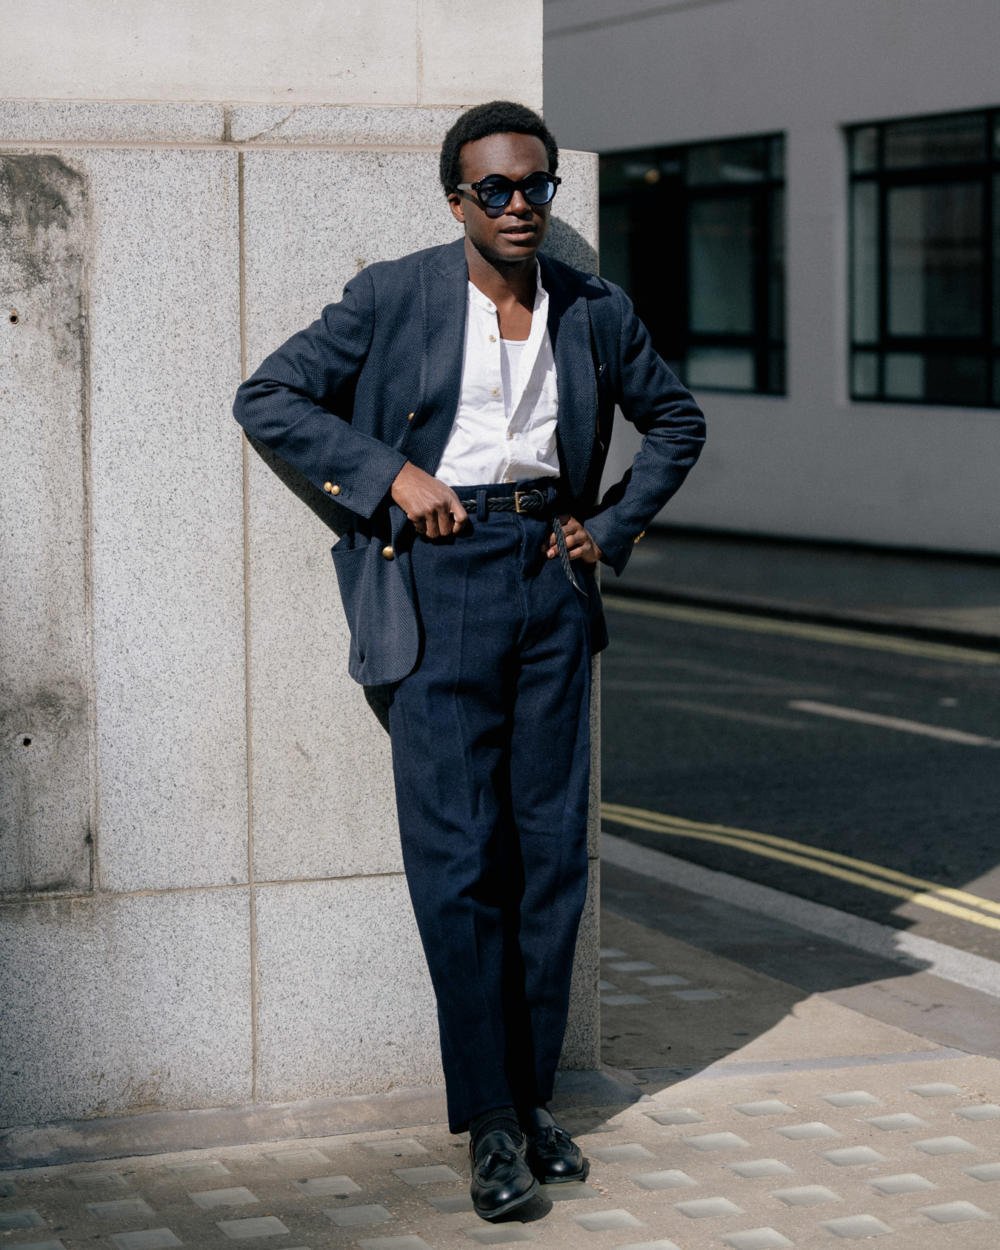 Colour, size and drama: How to dress like André Larnyoh – Permanent Style